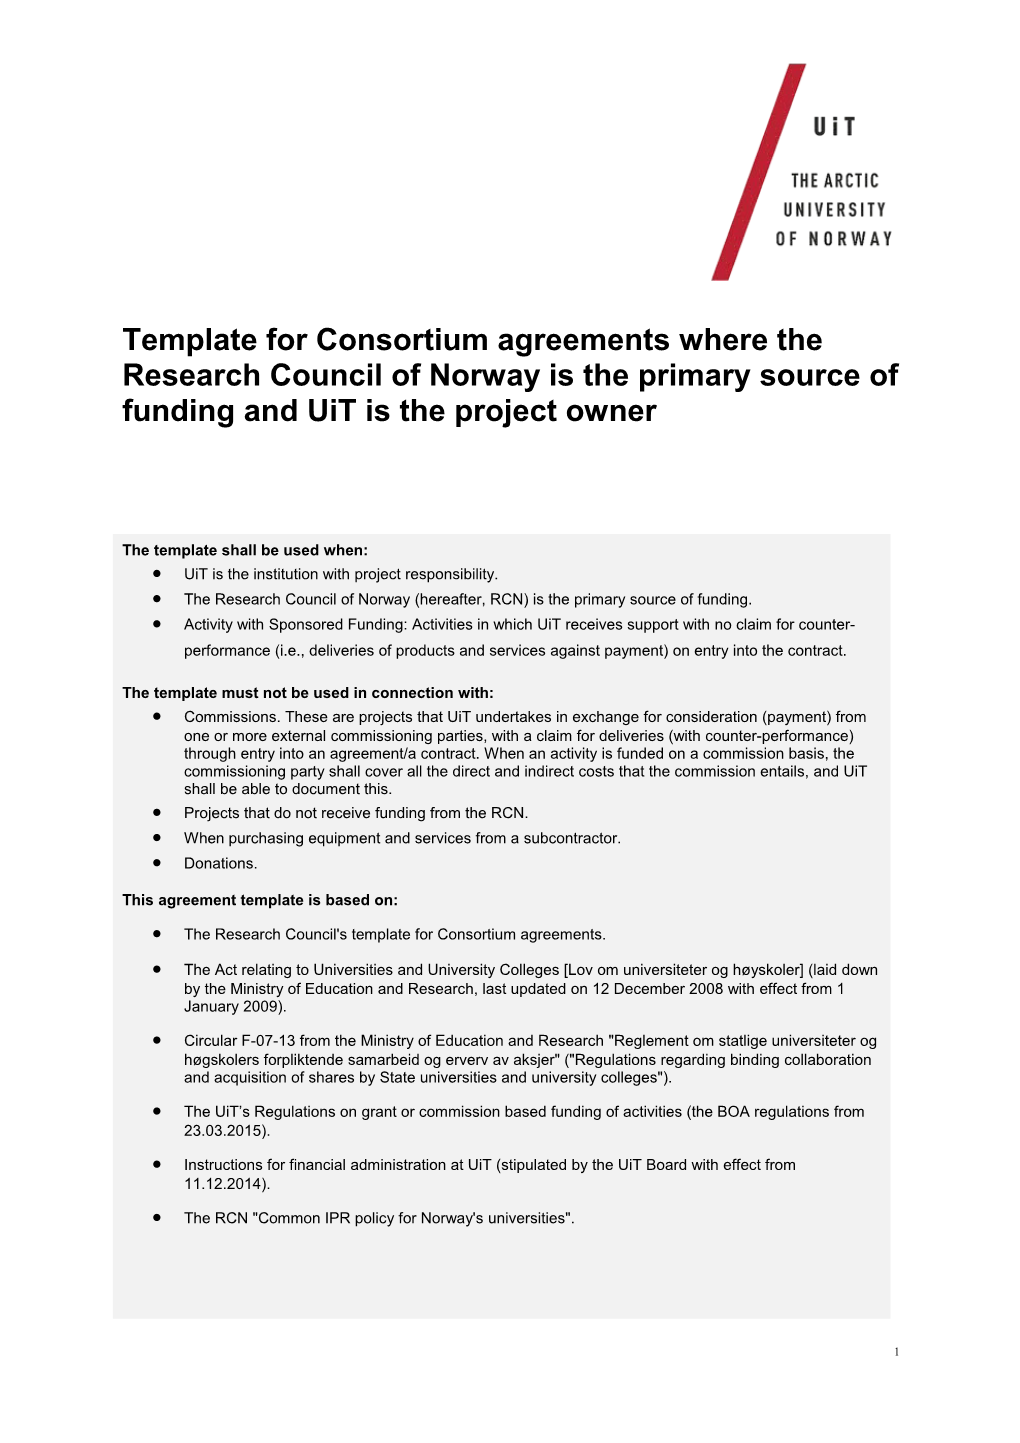 Template for Consortium Agreements Where the Research Council of Norway Is the Primary